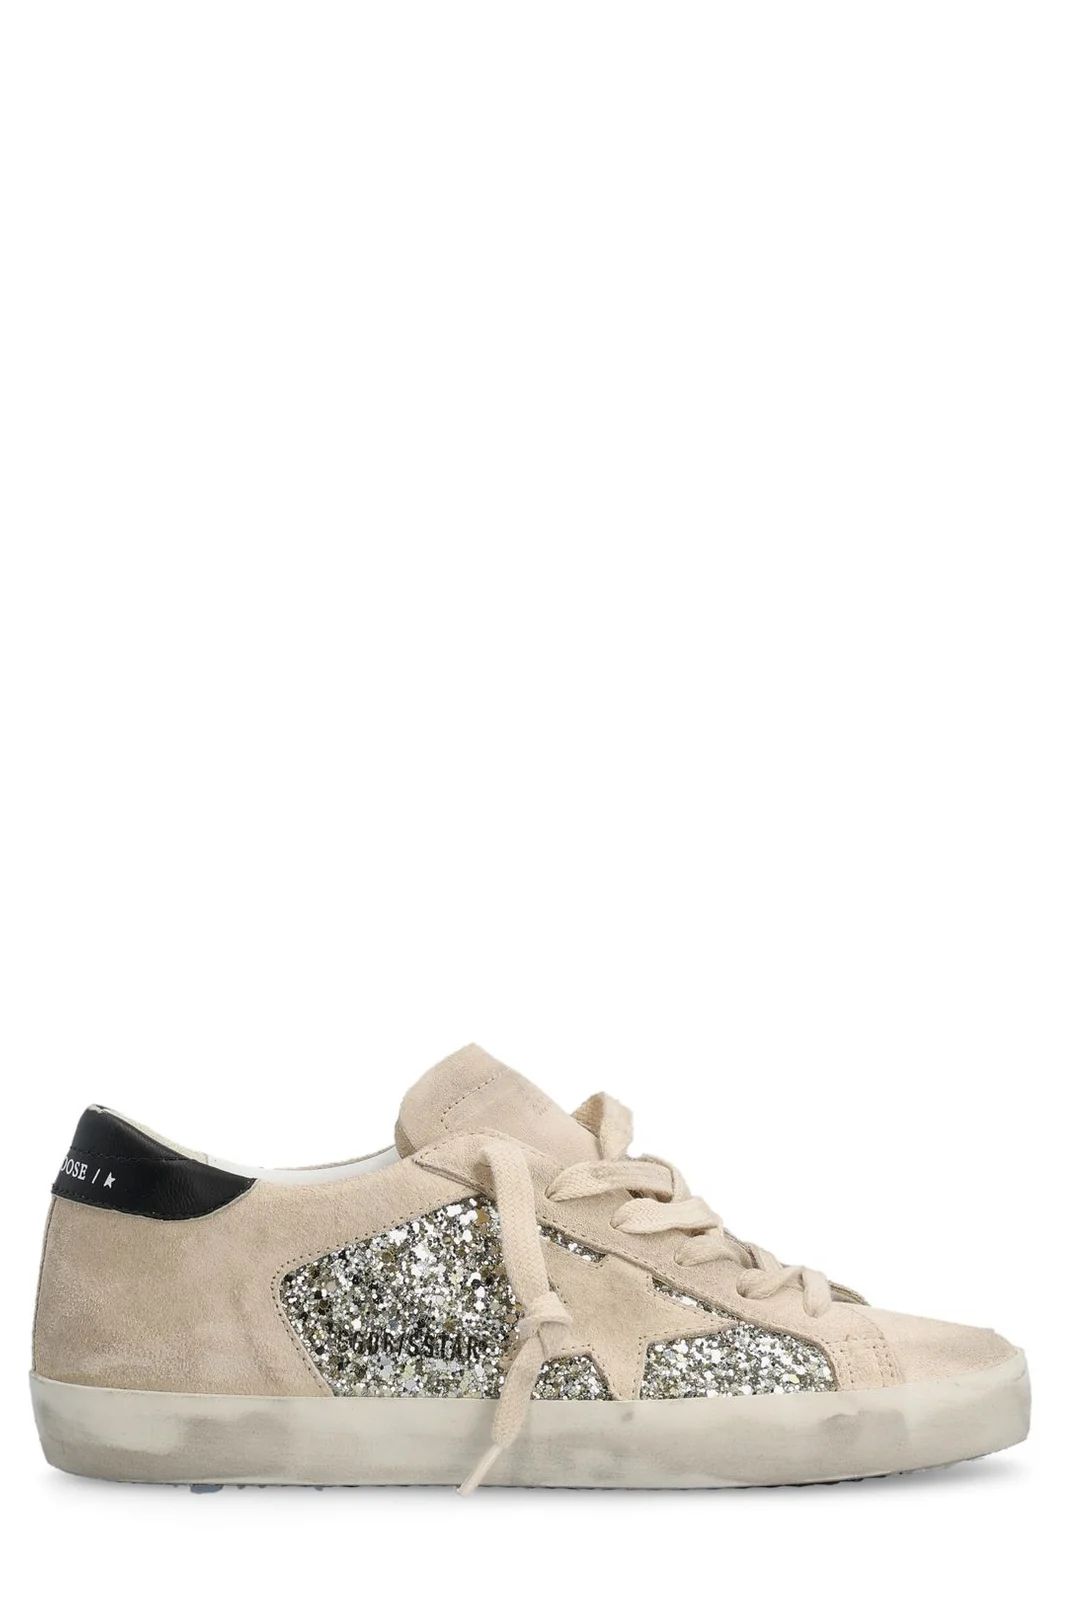 Golden Goose Deluxe Brand Star Patch Lace-Up Sneakers | Cettire Global